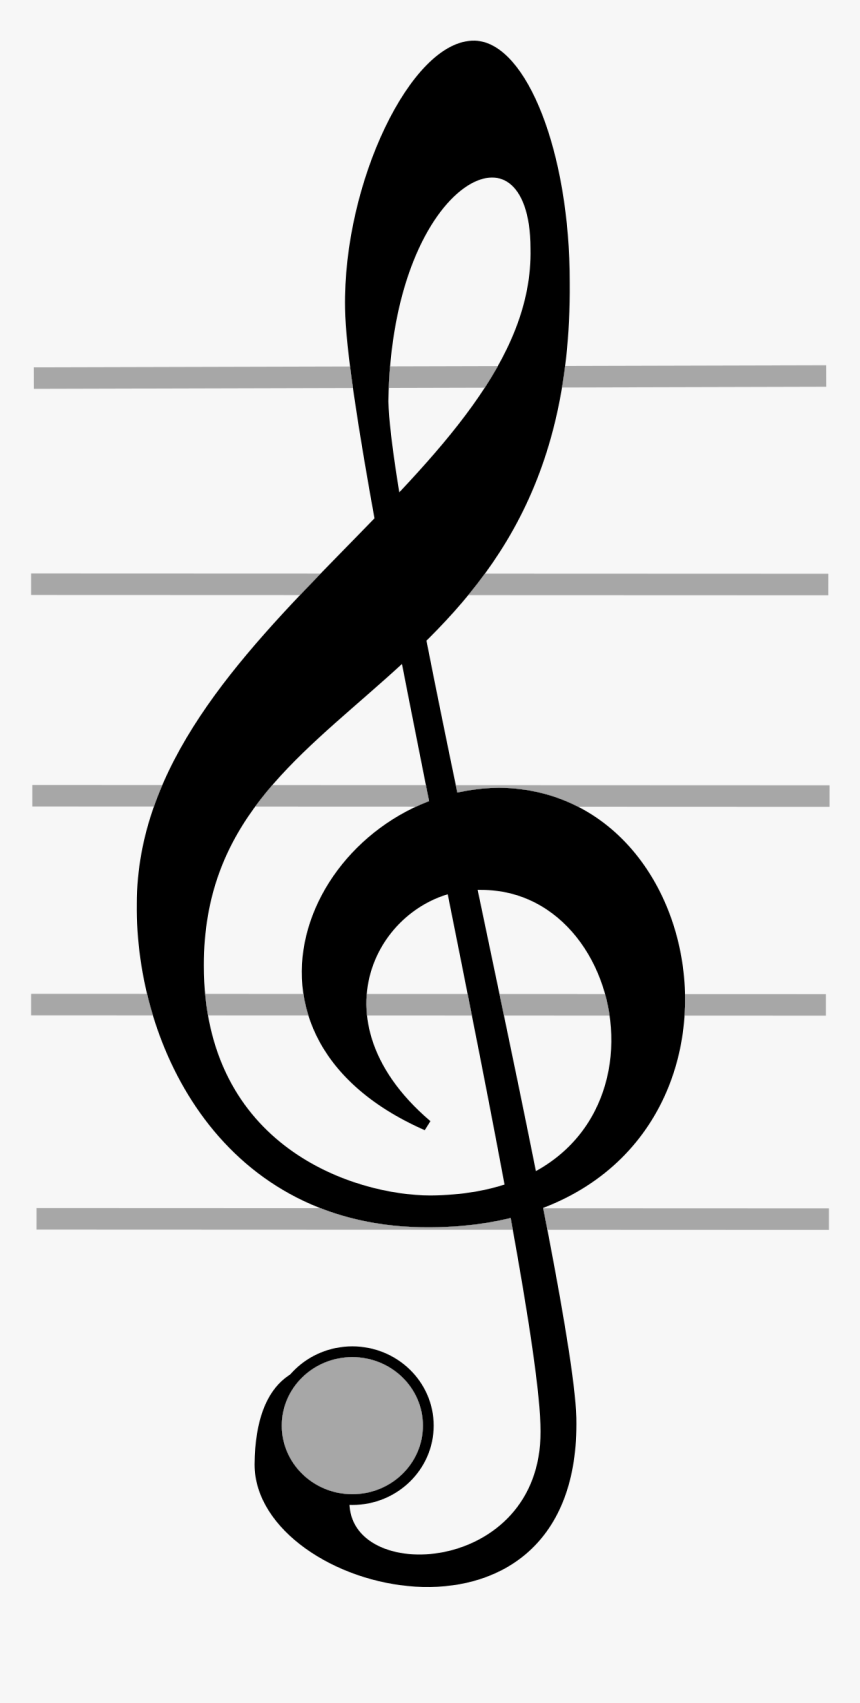 This Free Icons Png Design Of Trble Clef - Treble Clef Vector, Transparent Png, Free Download